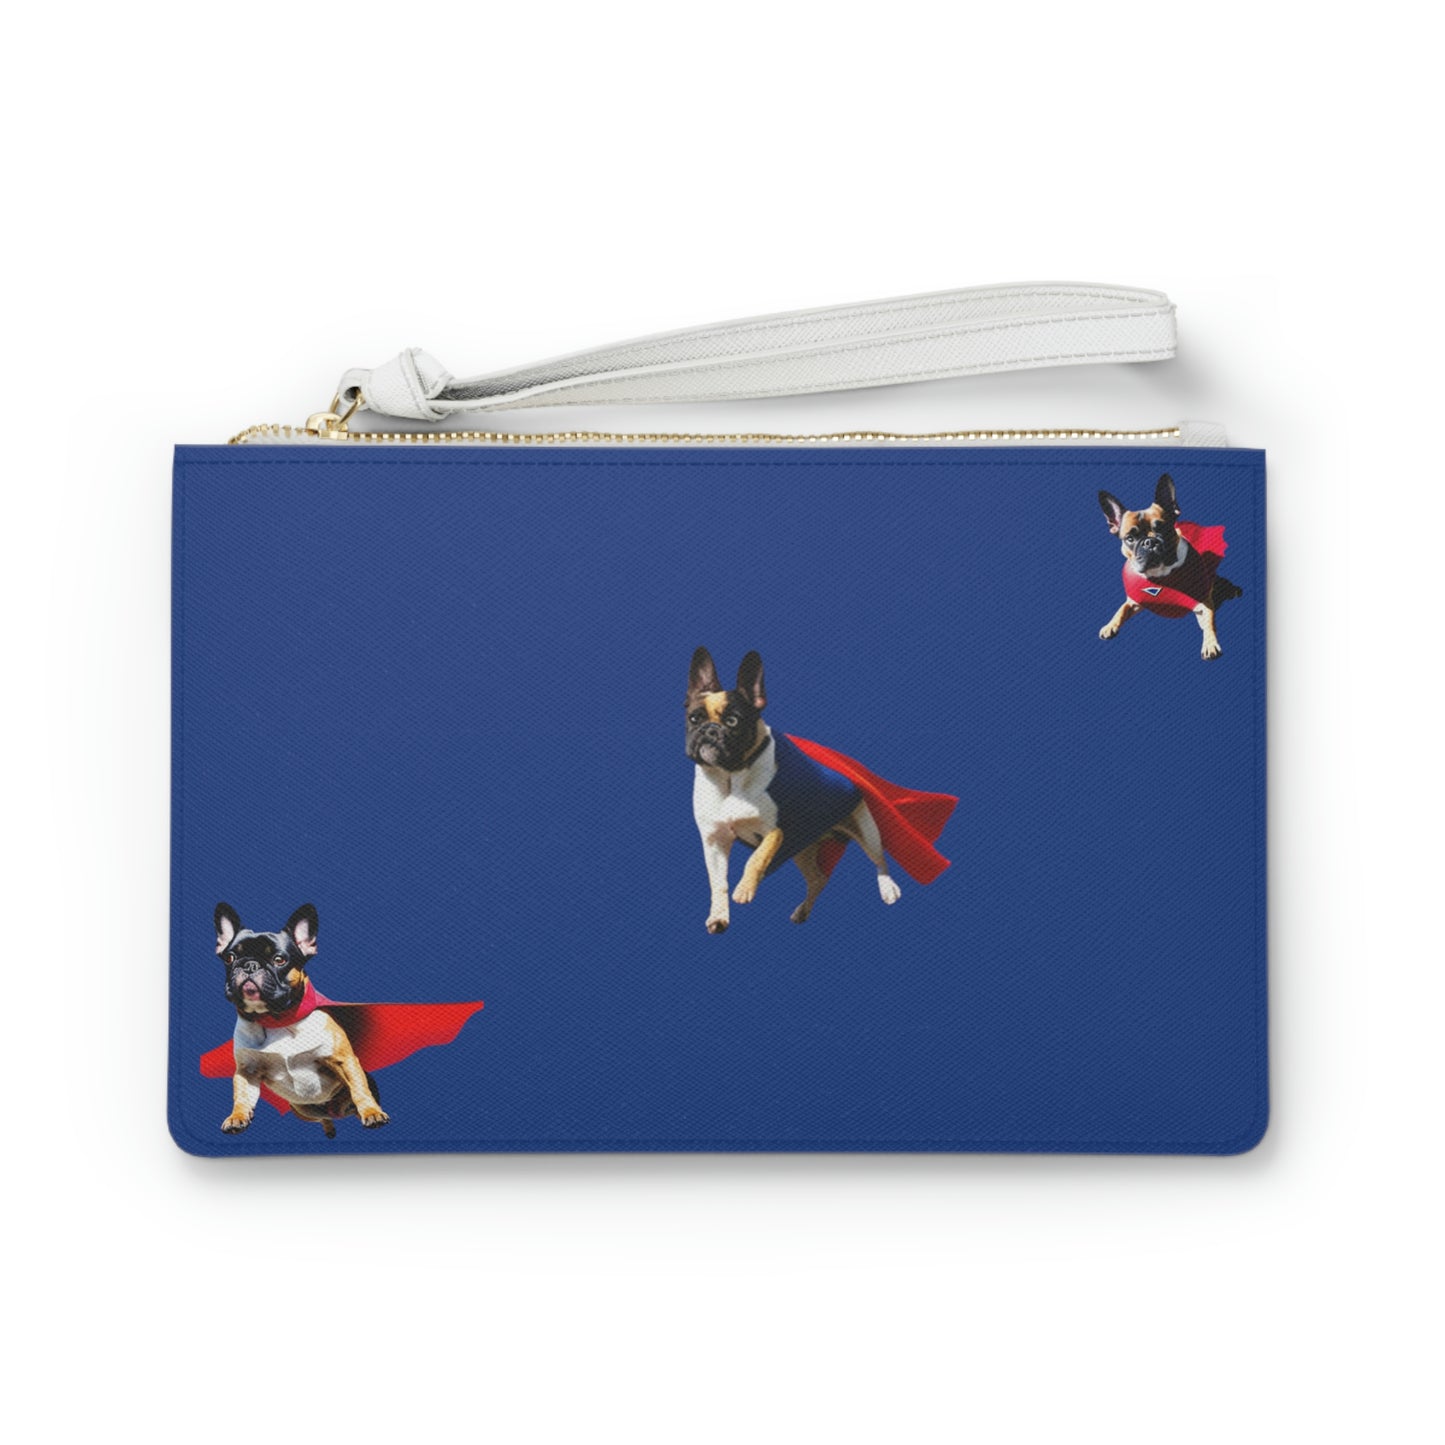 Super Frenchie Clutch Bag | BKLA | Shoes & Accessories | shoes, hats, phone covers, tote bags, clutch bags